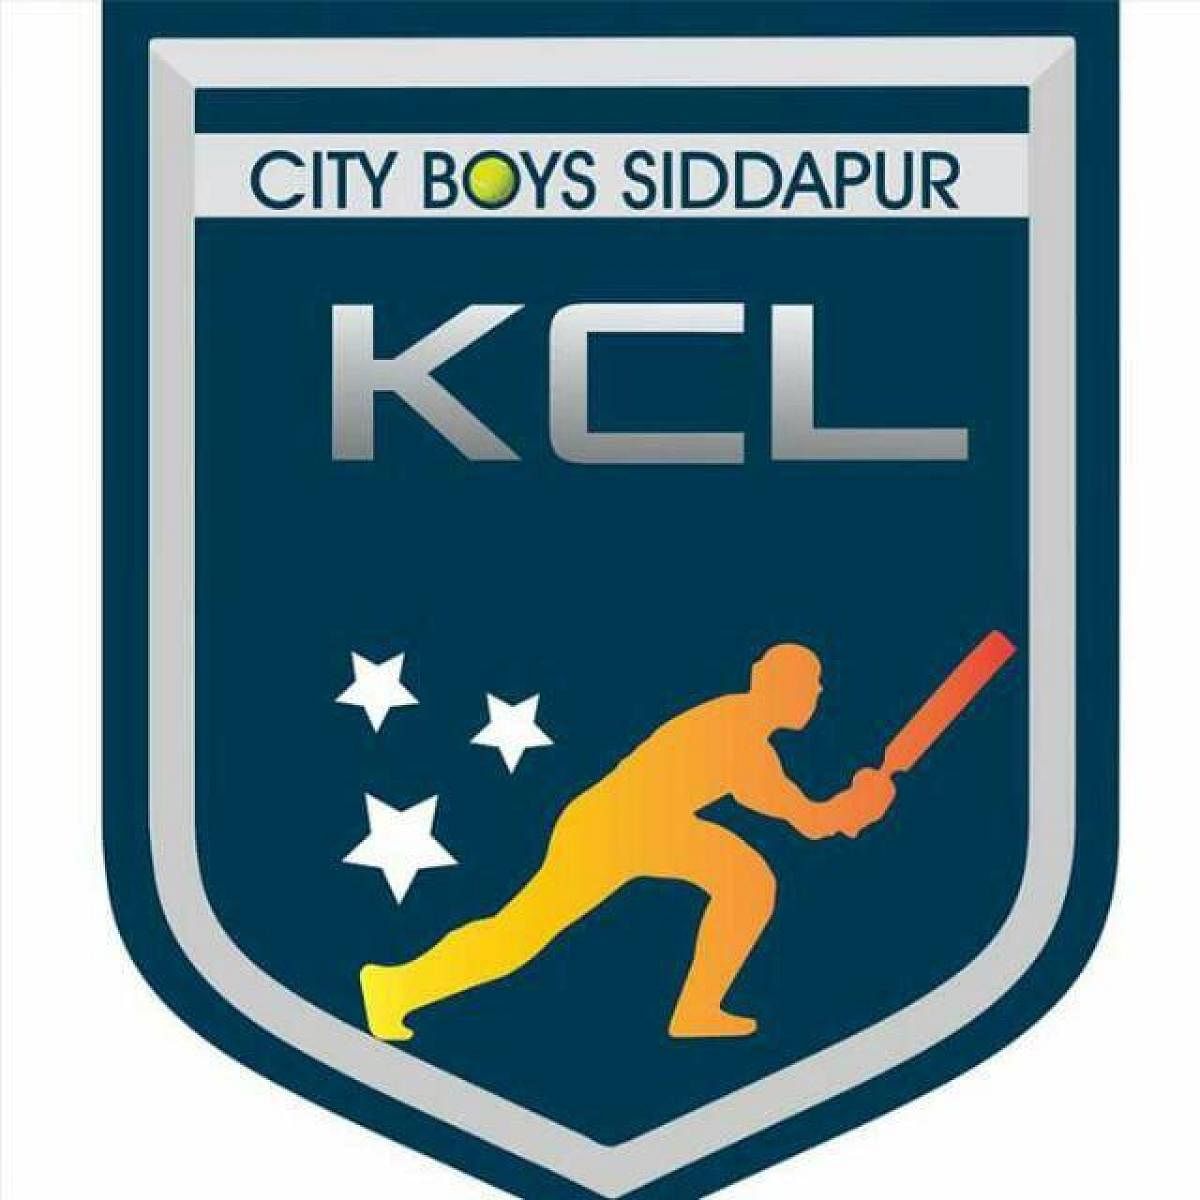 The logo of the KCL cricket tournament.